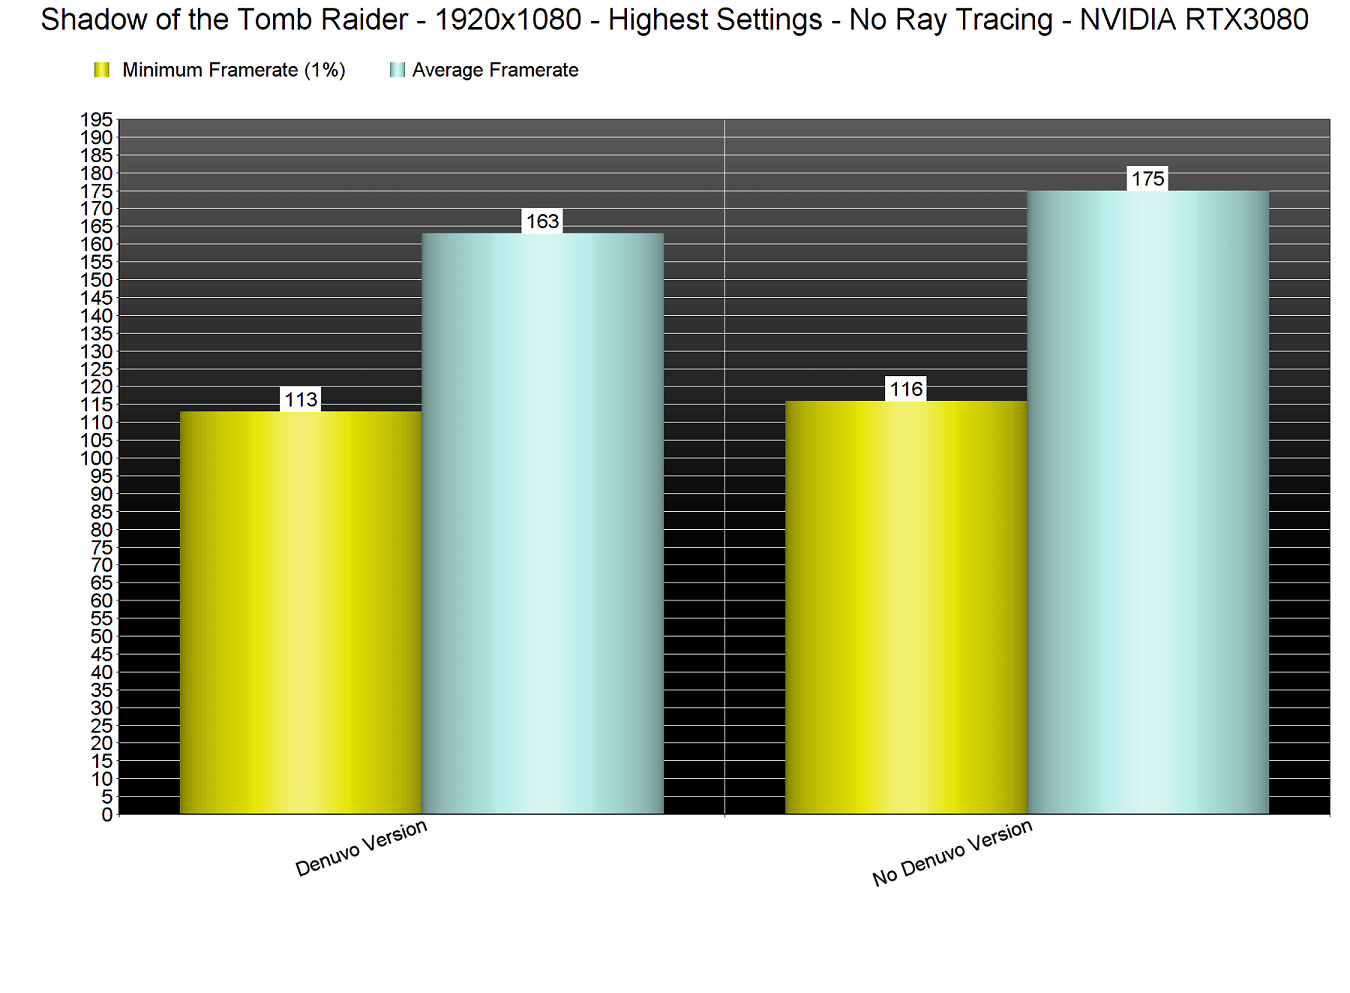 Chart showing FPS difference between Denuvo and non-Denuvo versions of Shadow of the Tomb Raider.